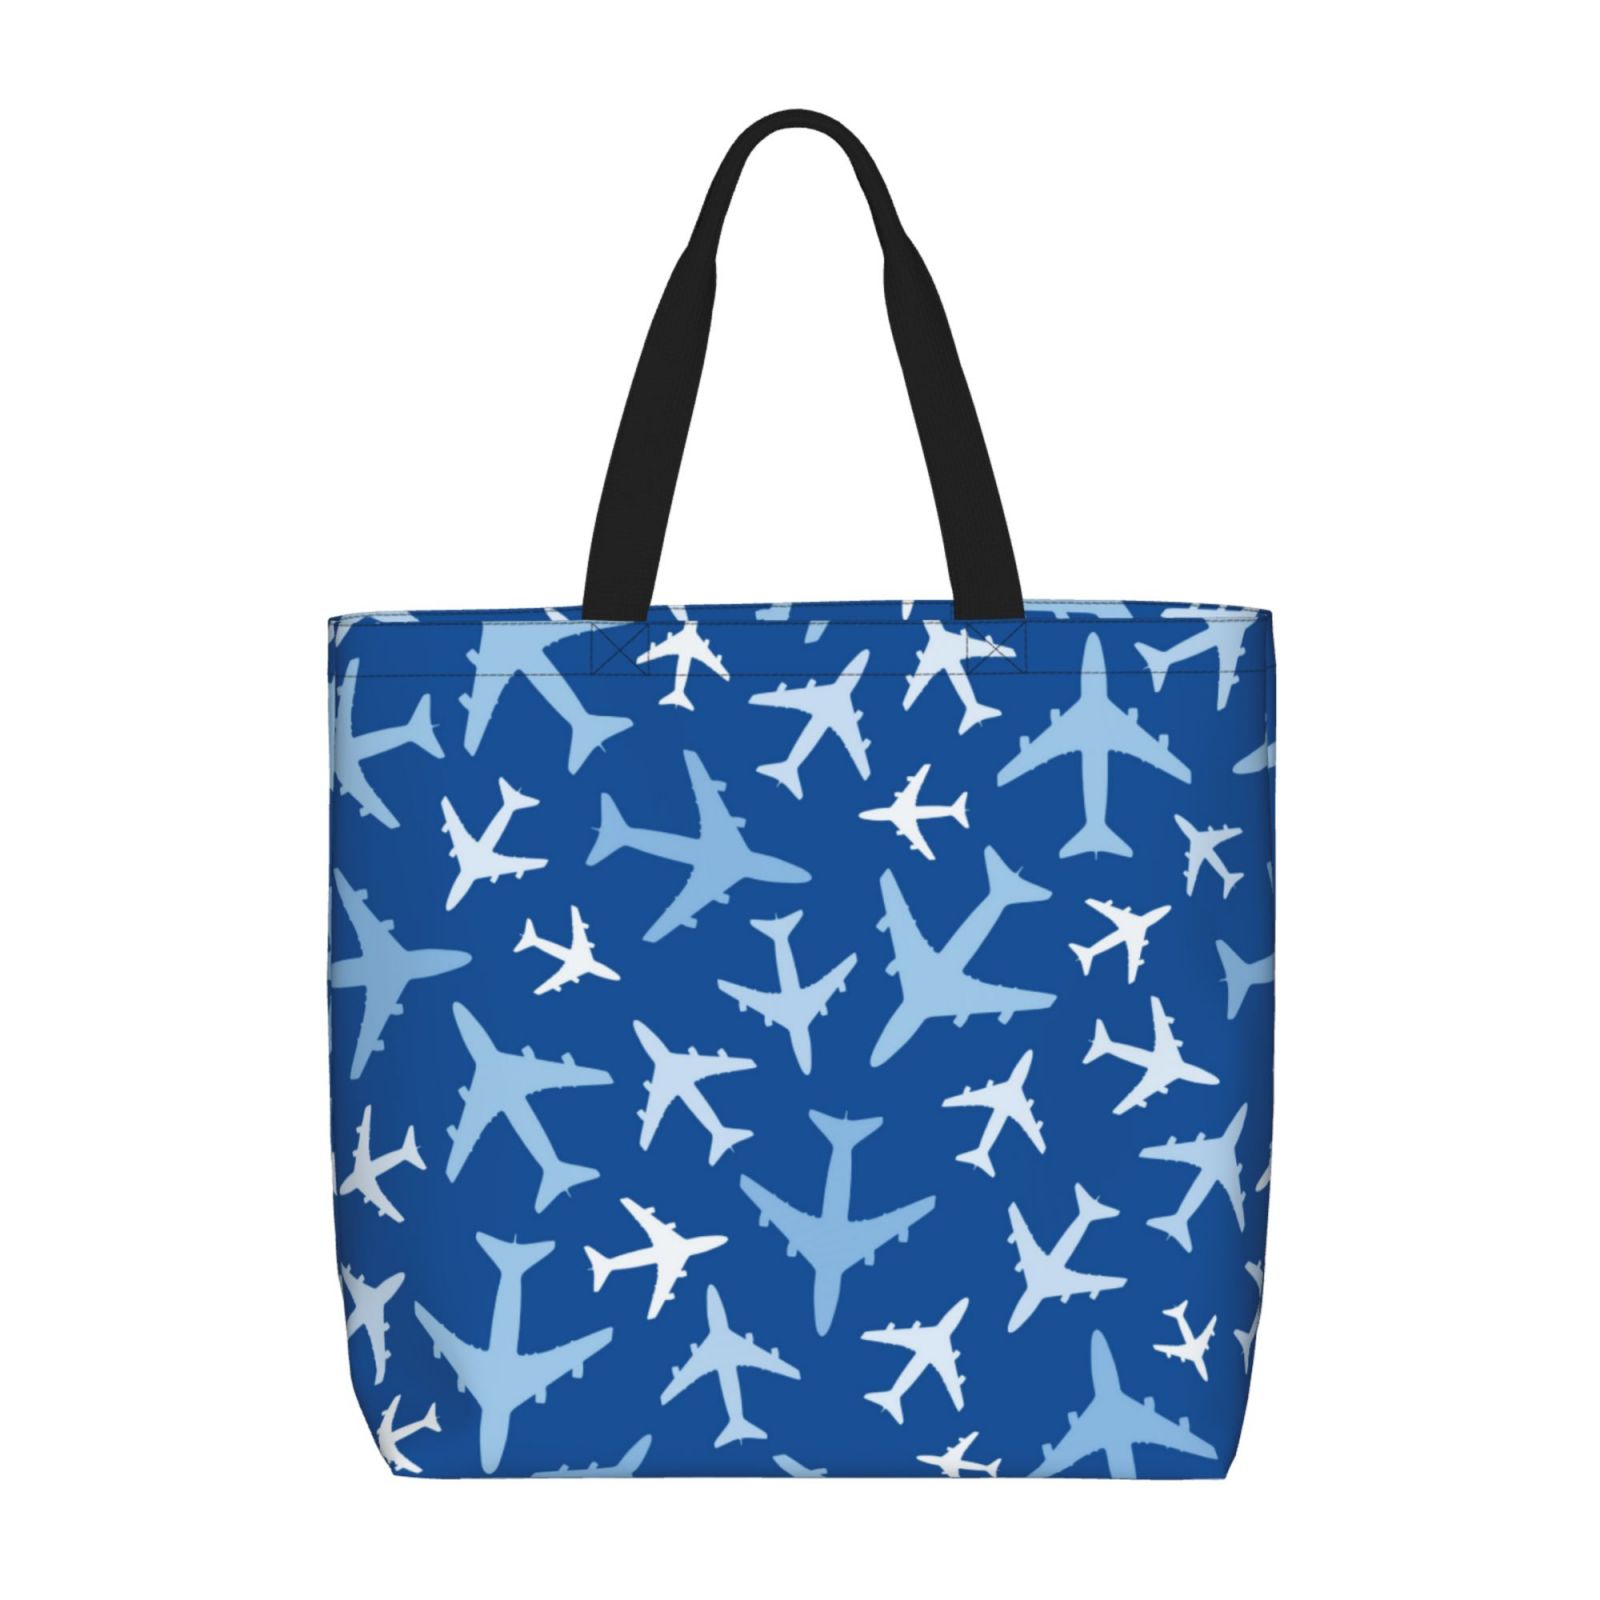 Ocsxa Airplanes In The Sky Tote Bag For Women,Tote Bag With Zipper ...